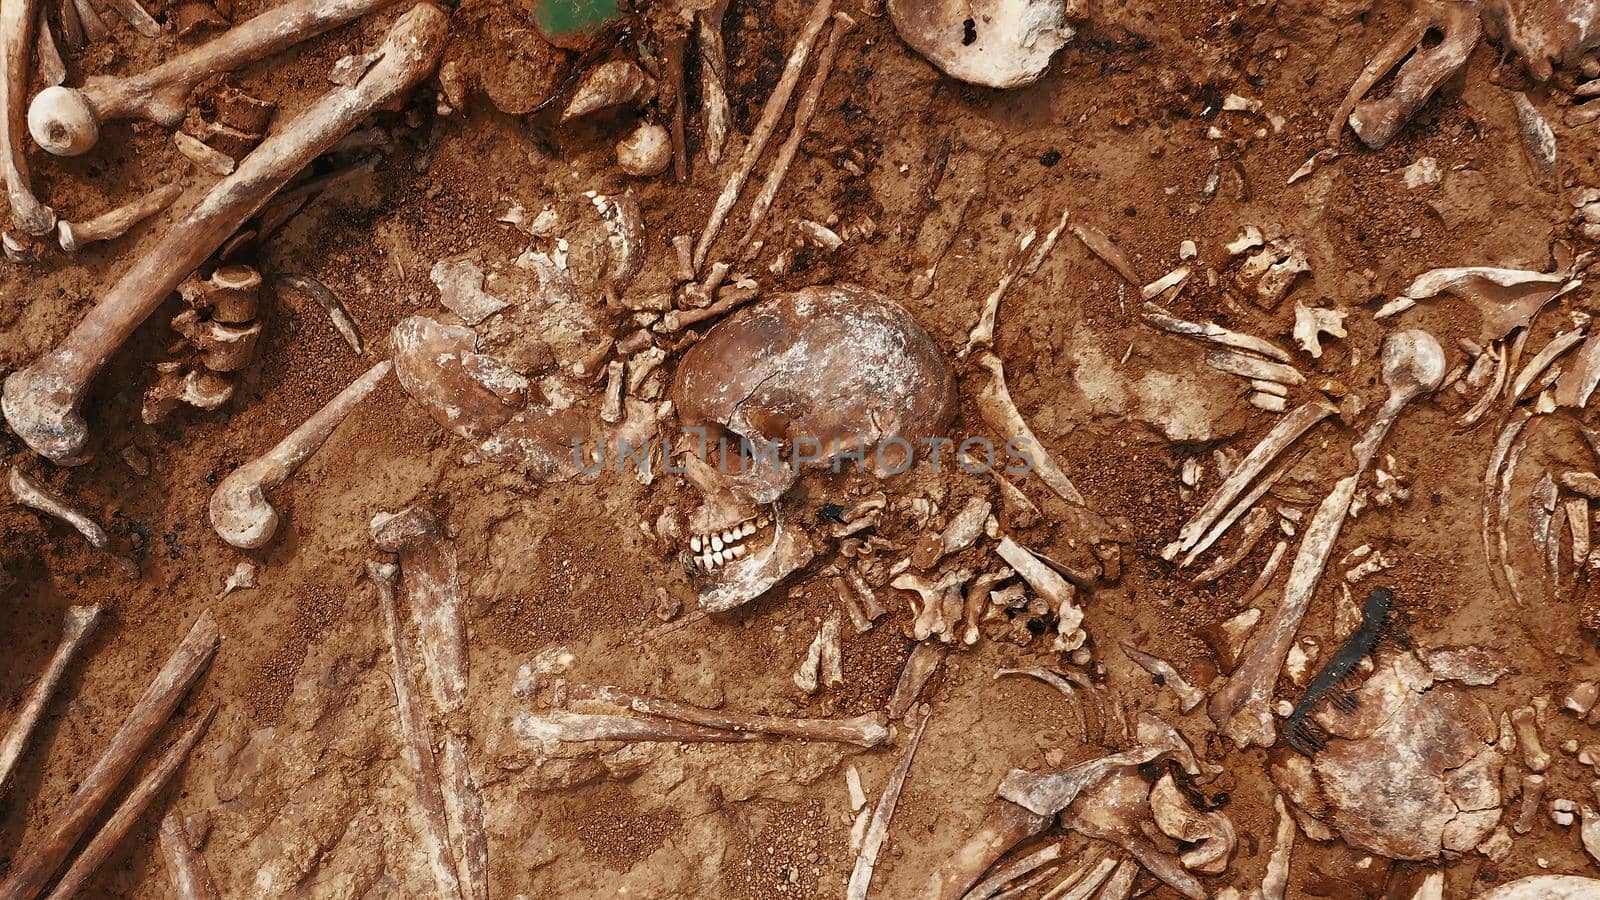 Archaeological excavations, Human remains in the ground. War crime scene. Site of a mass shooting of people. Human remains - bones of skeleton, skulls.